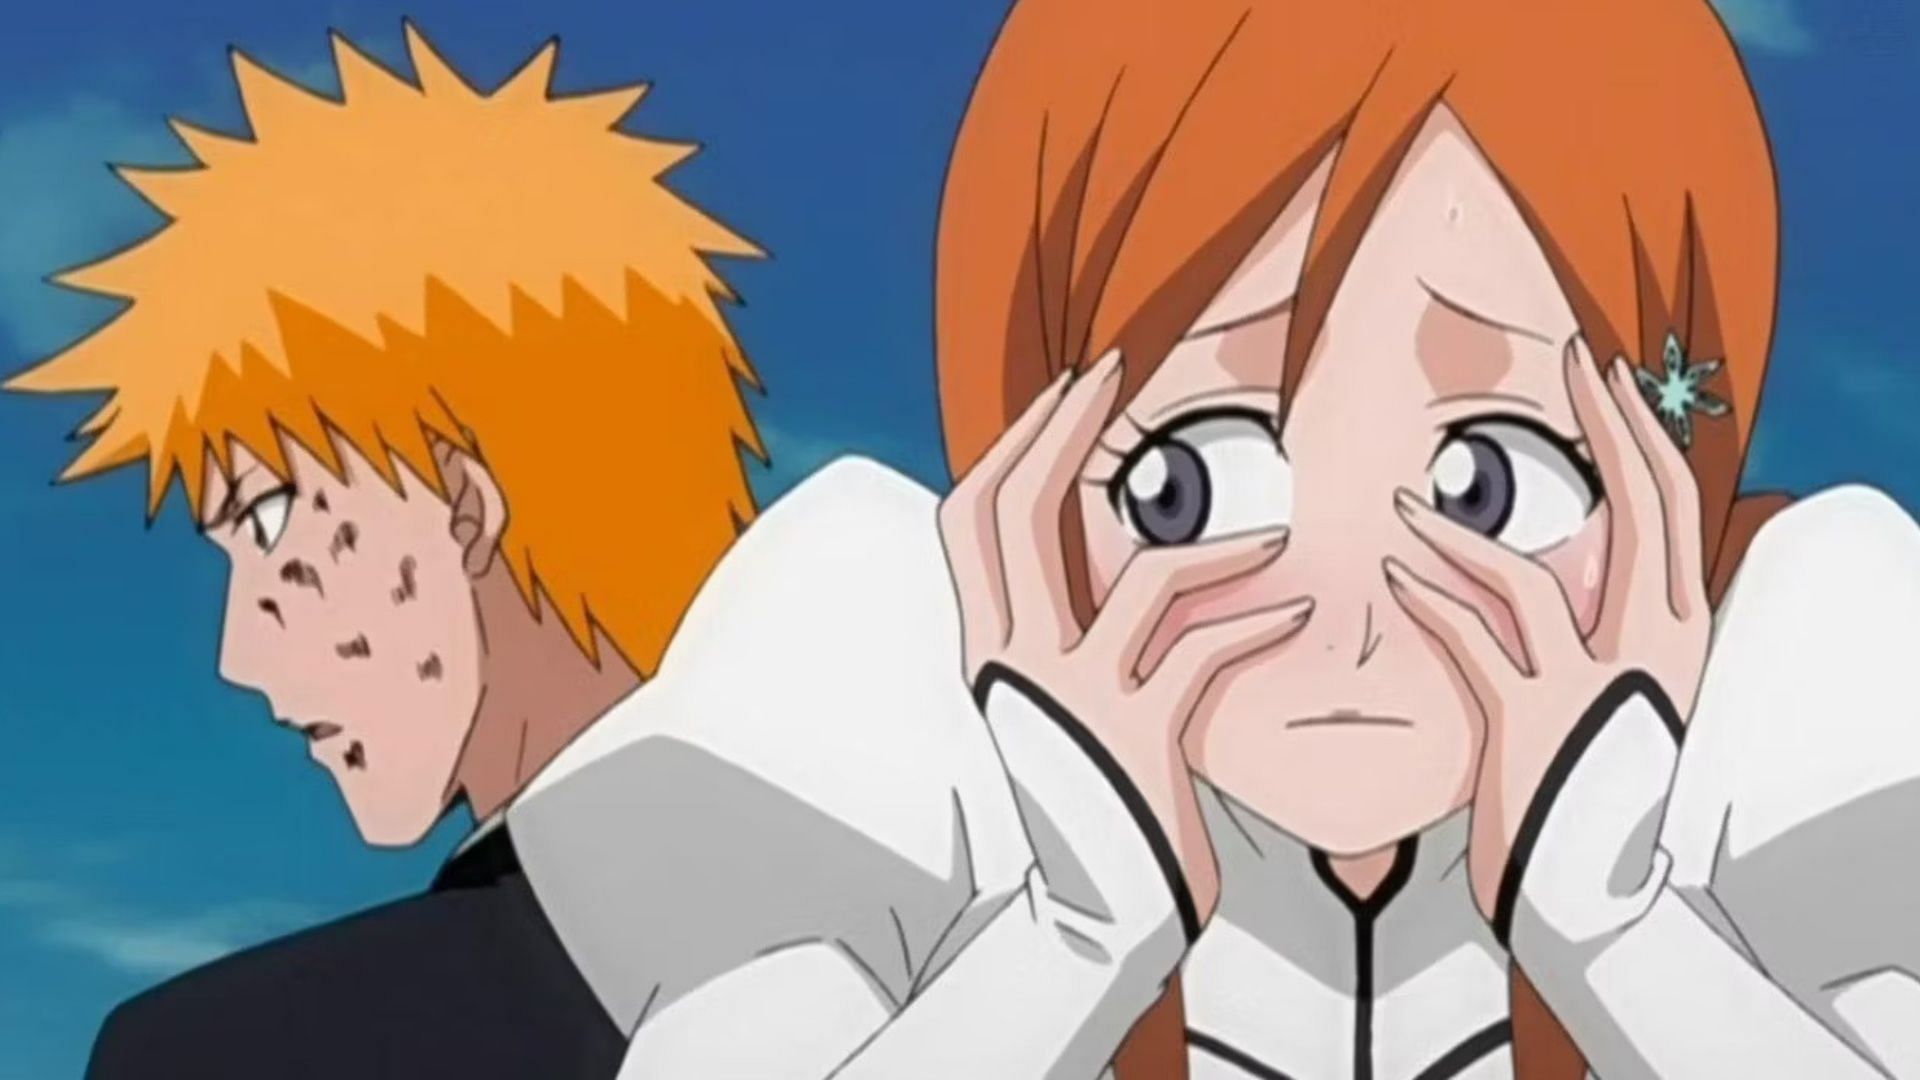 Bleach's Creator Confirms Ichigo's Wholesome Fate After the Series' End